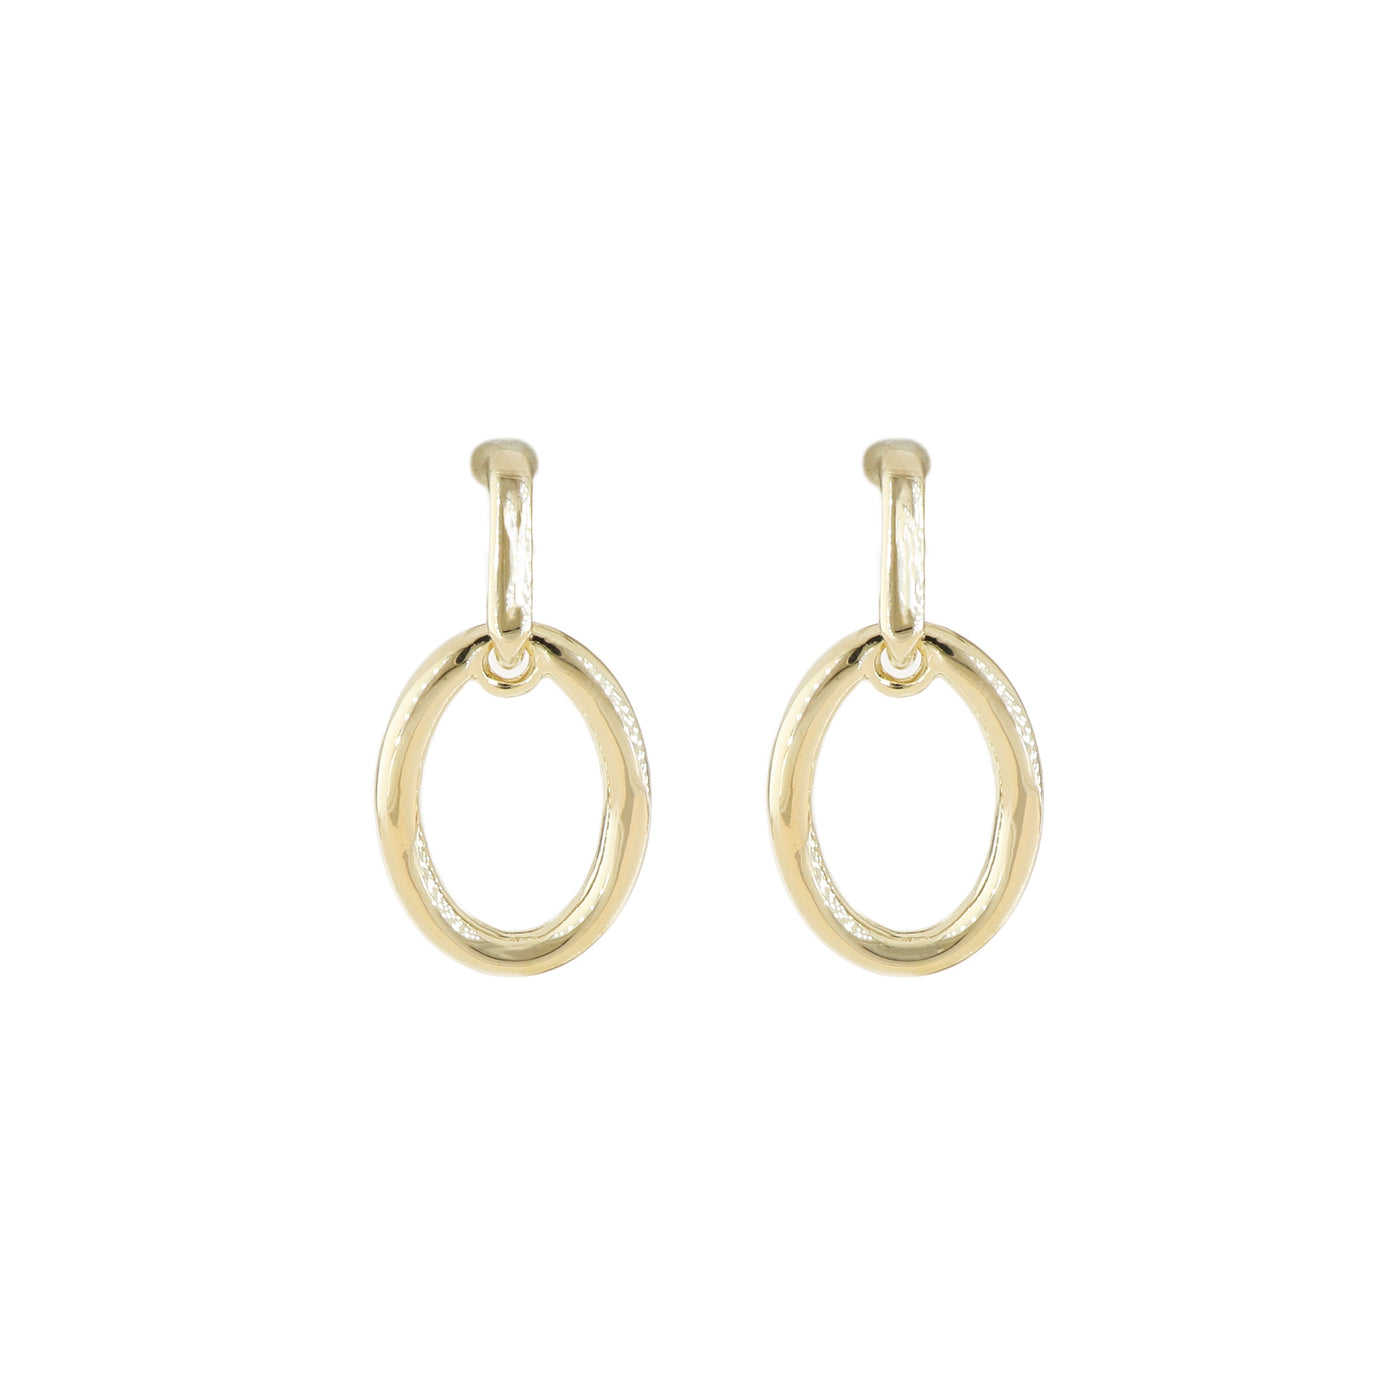 Aldrava Collection - Oval Earrings in Gold